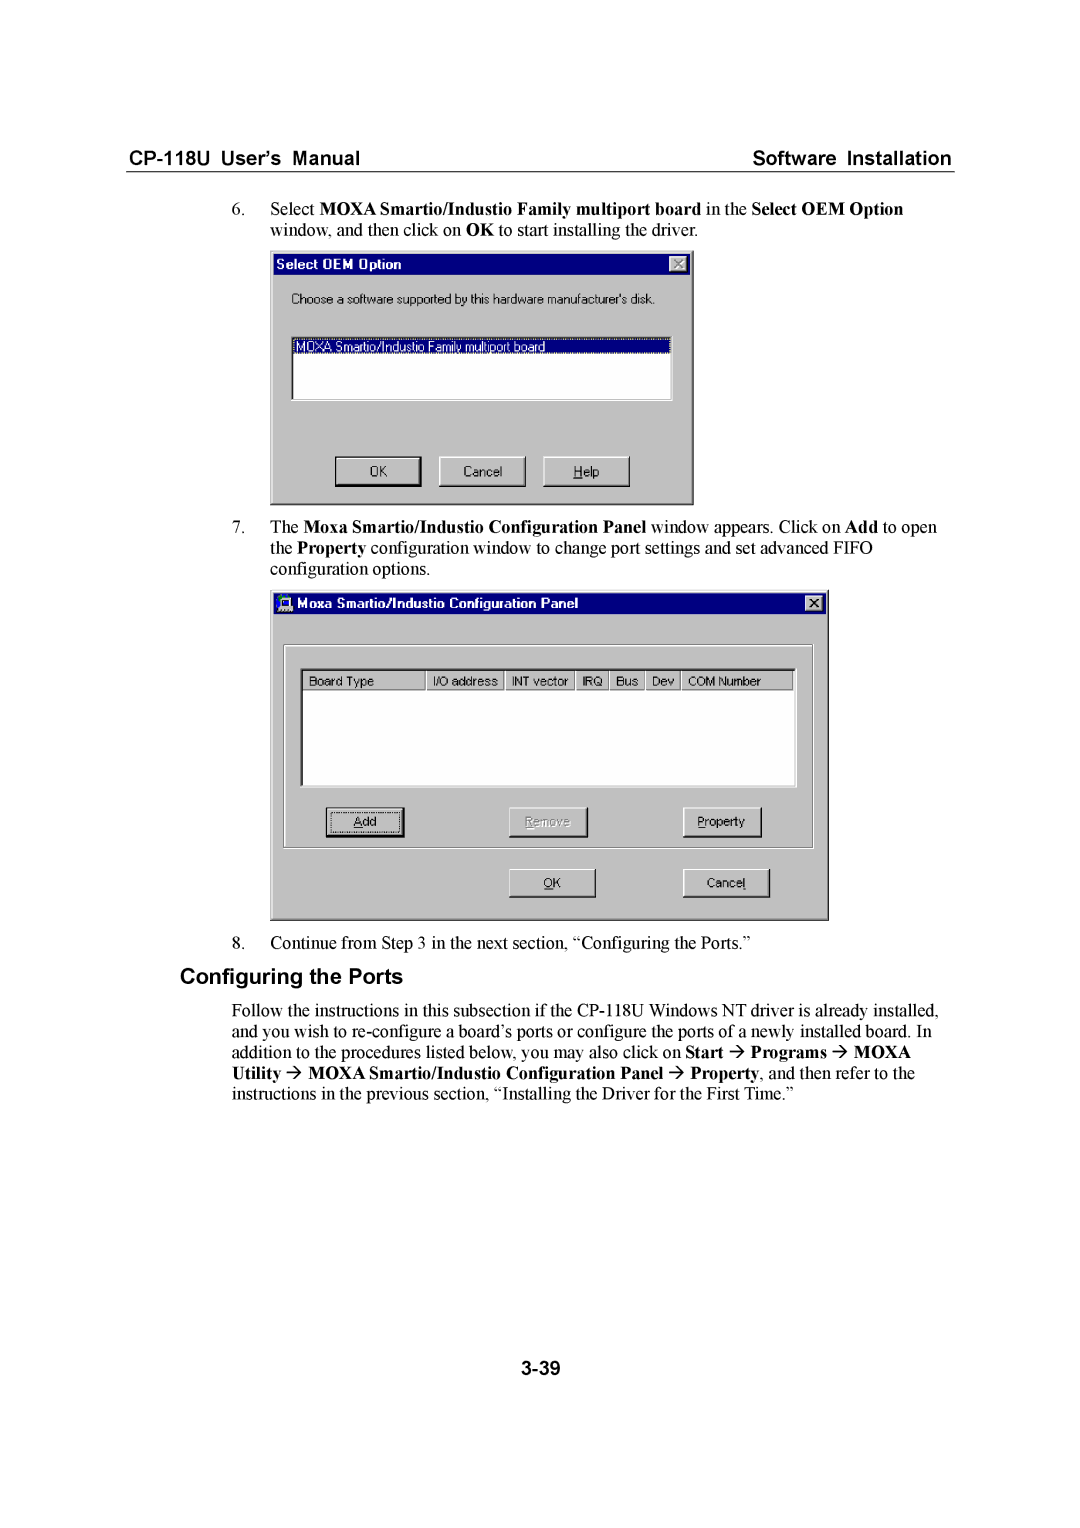 Moxa Technologies CP-118U user manual Continue from in the next section, Configuring the Ports 